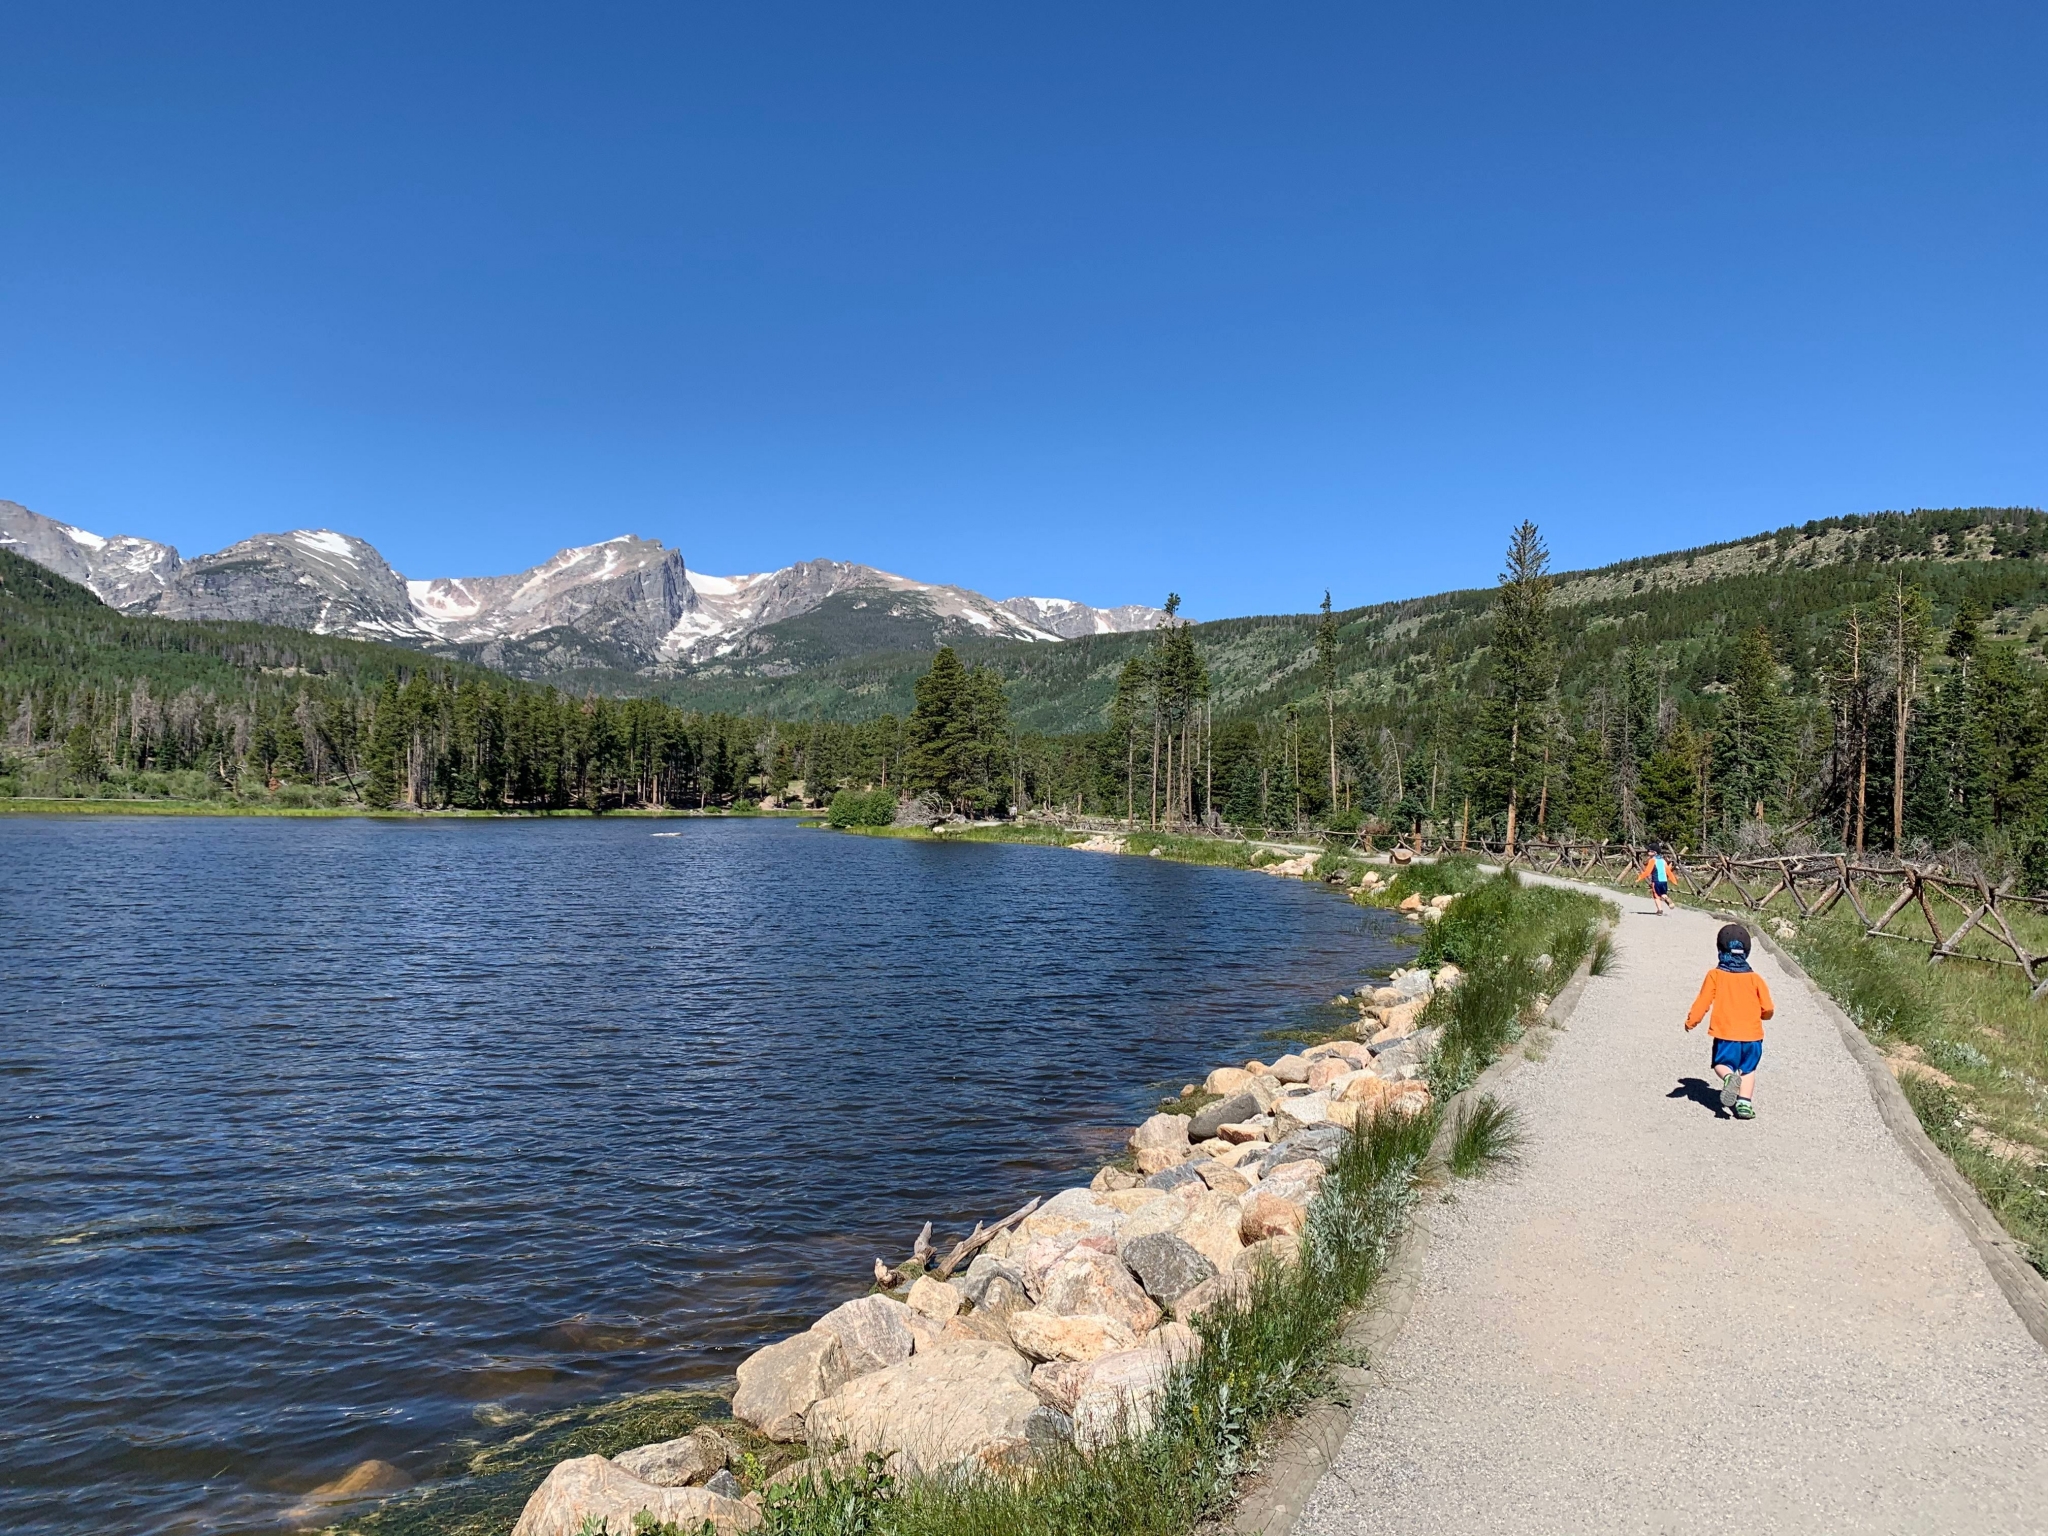 A child is walking along a path near a lake with mountains in the background.